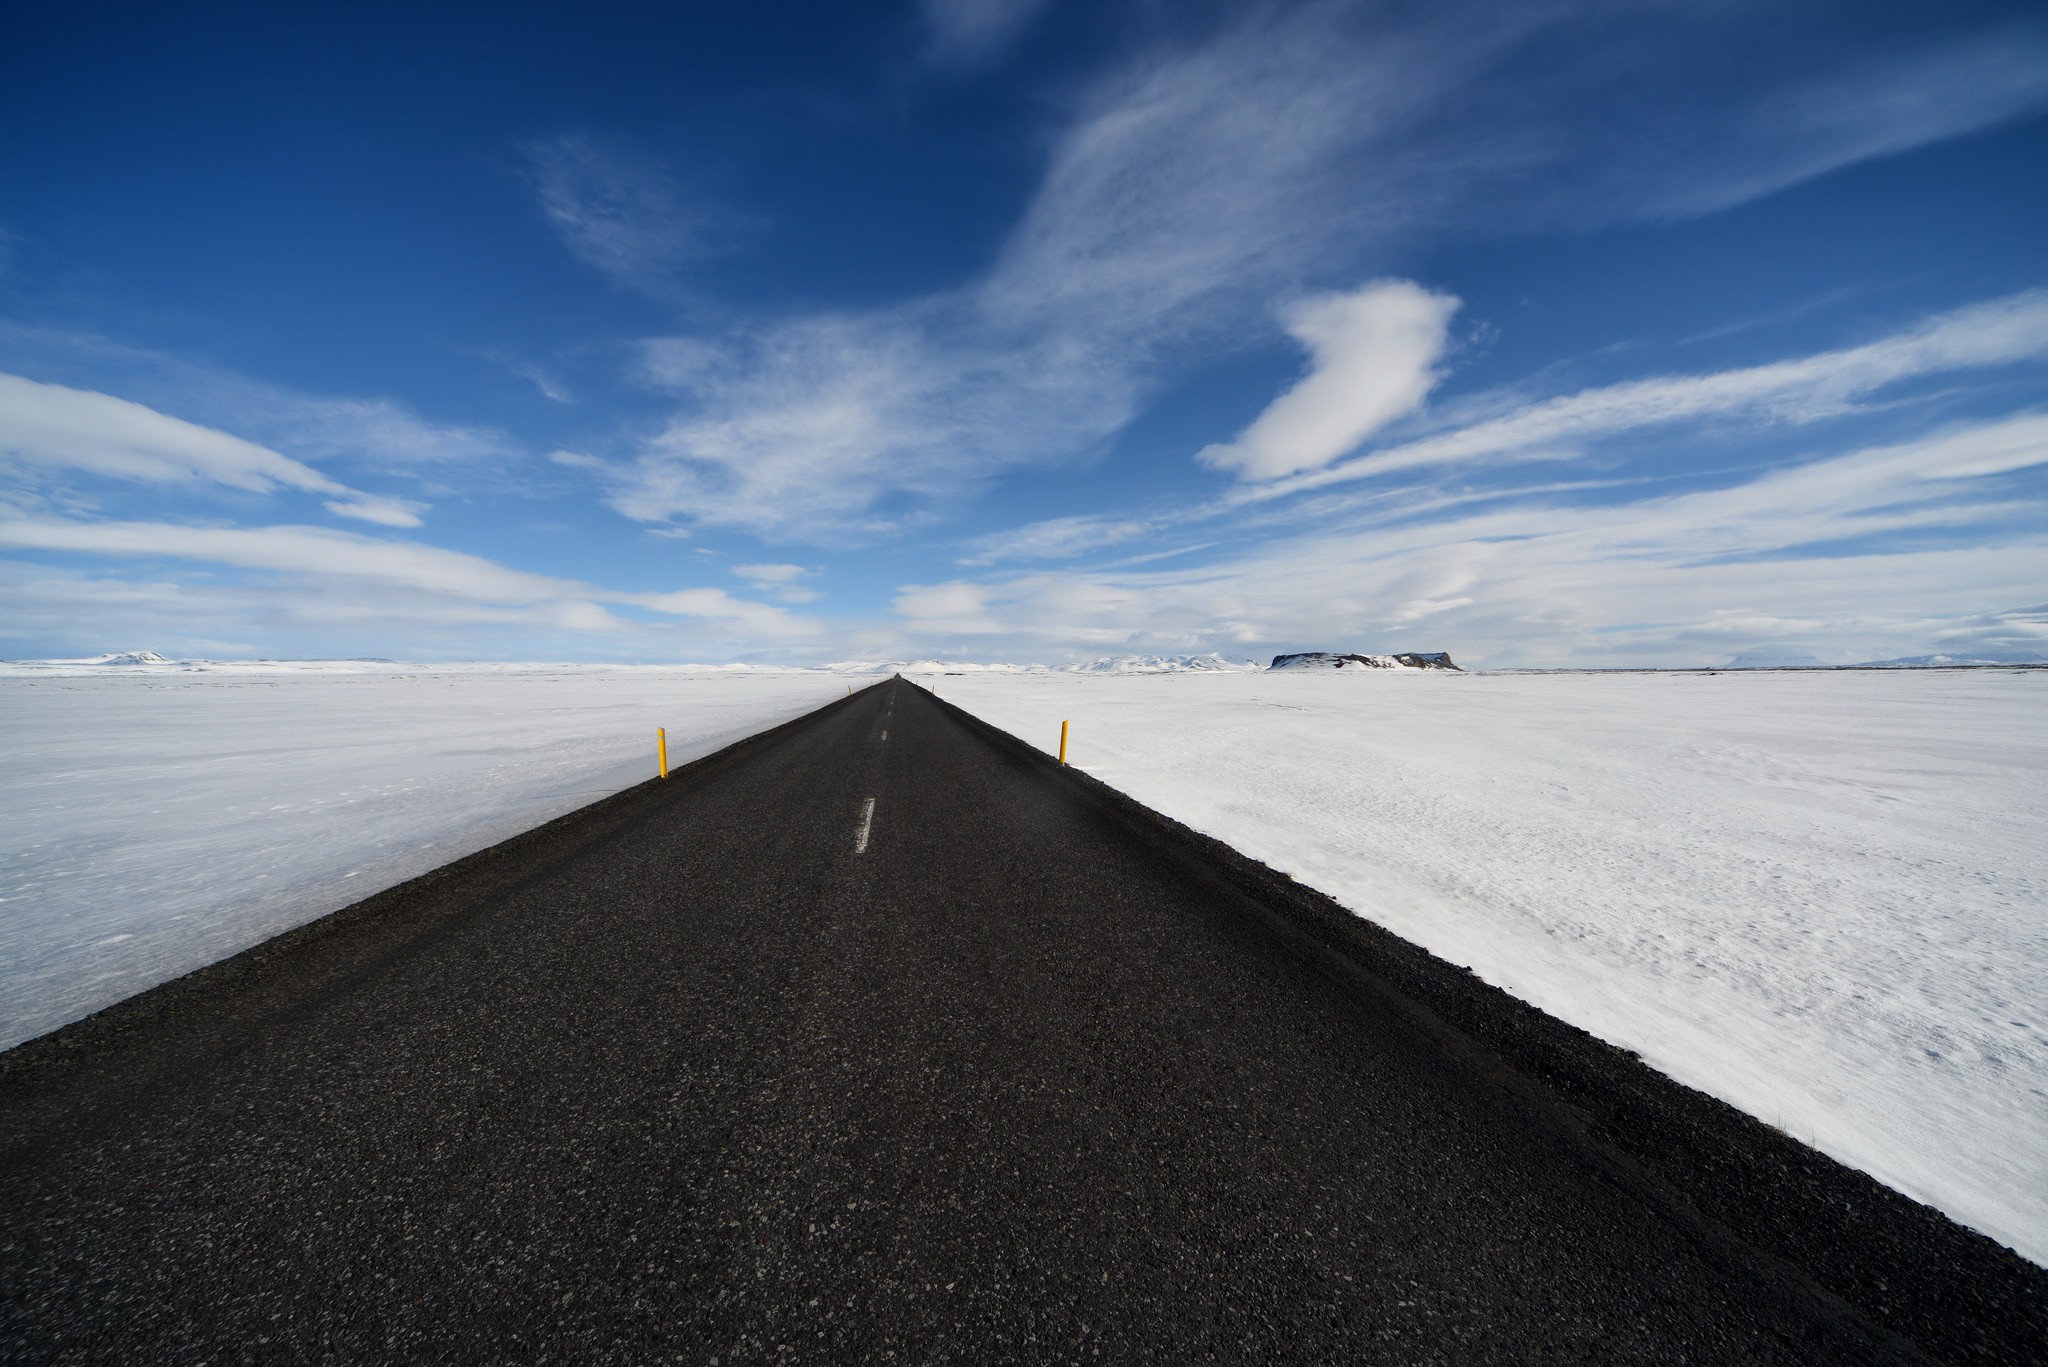 Snowfields on a country highway